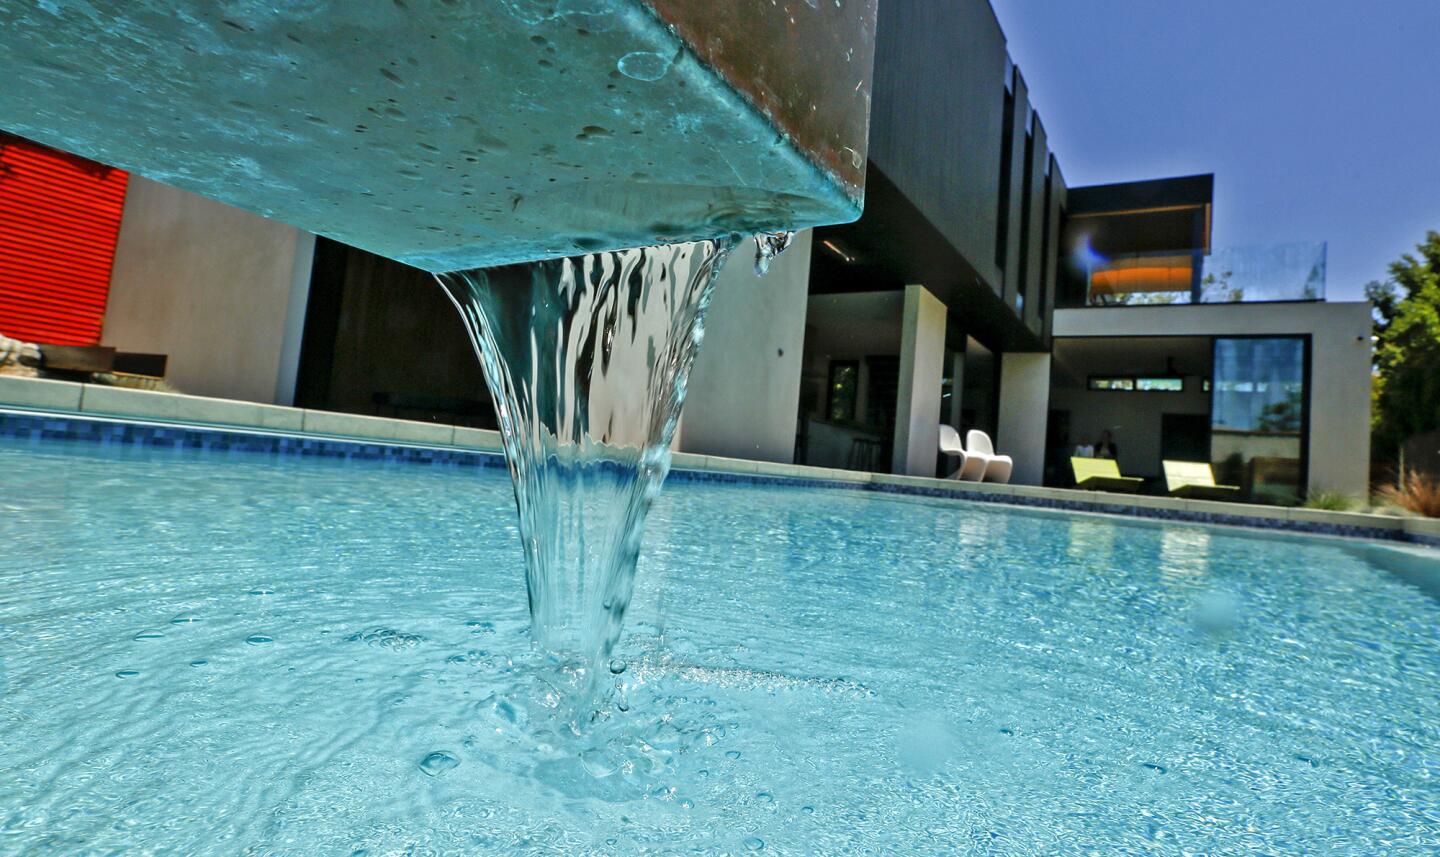 Water flows into the swimming pool through a sleek U-shaped metal channel.